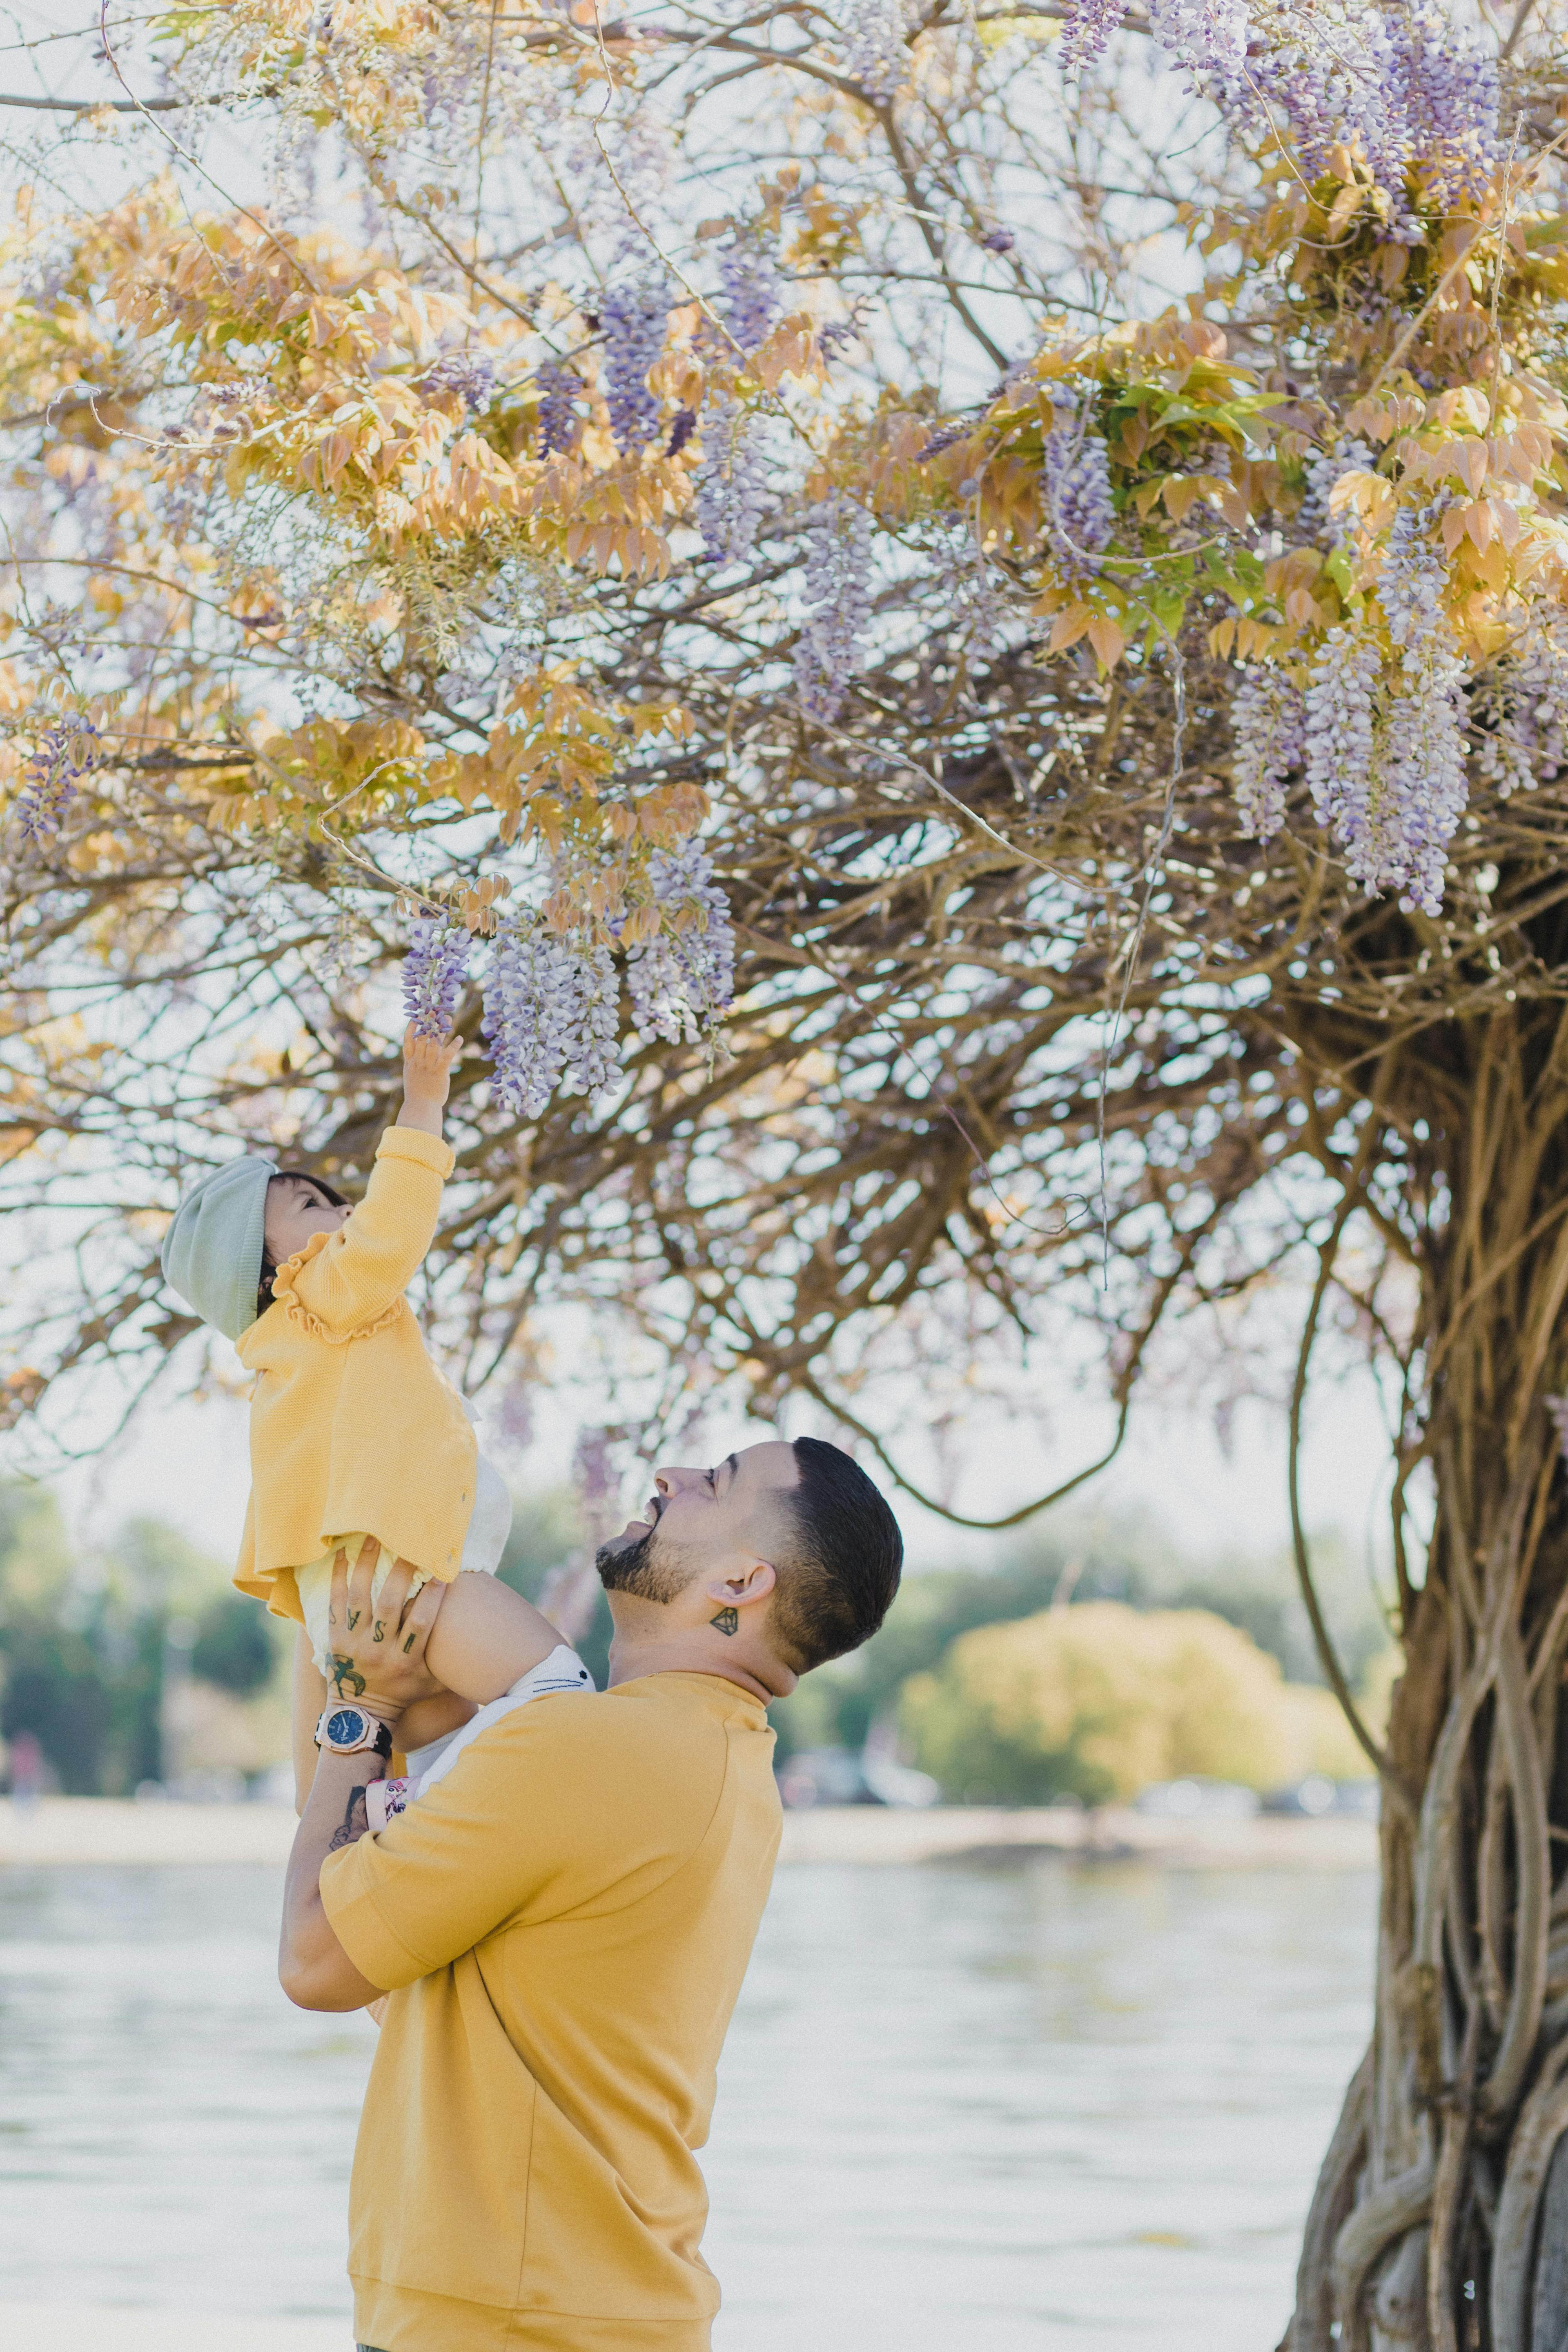 A father lifts his child towards a blossoming tree branch.